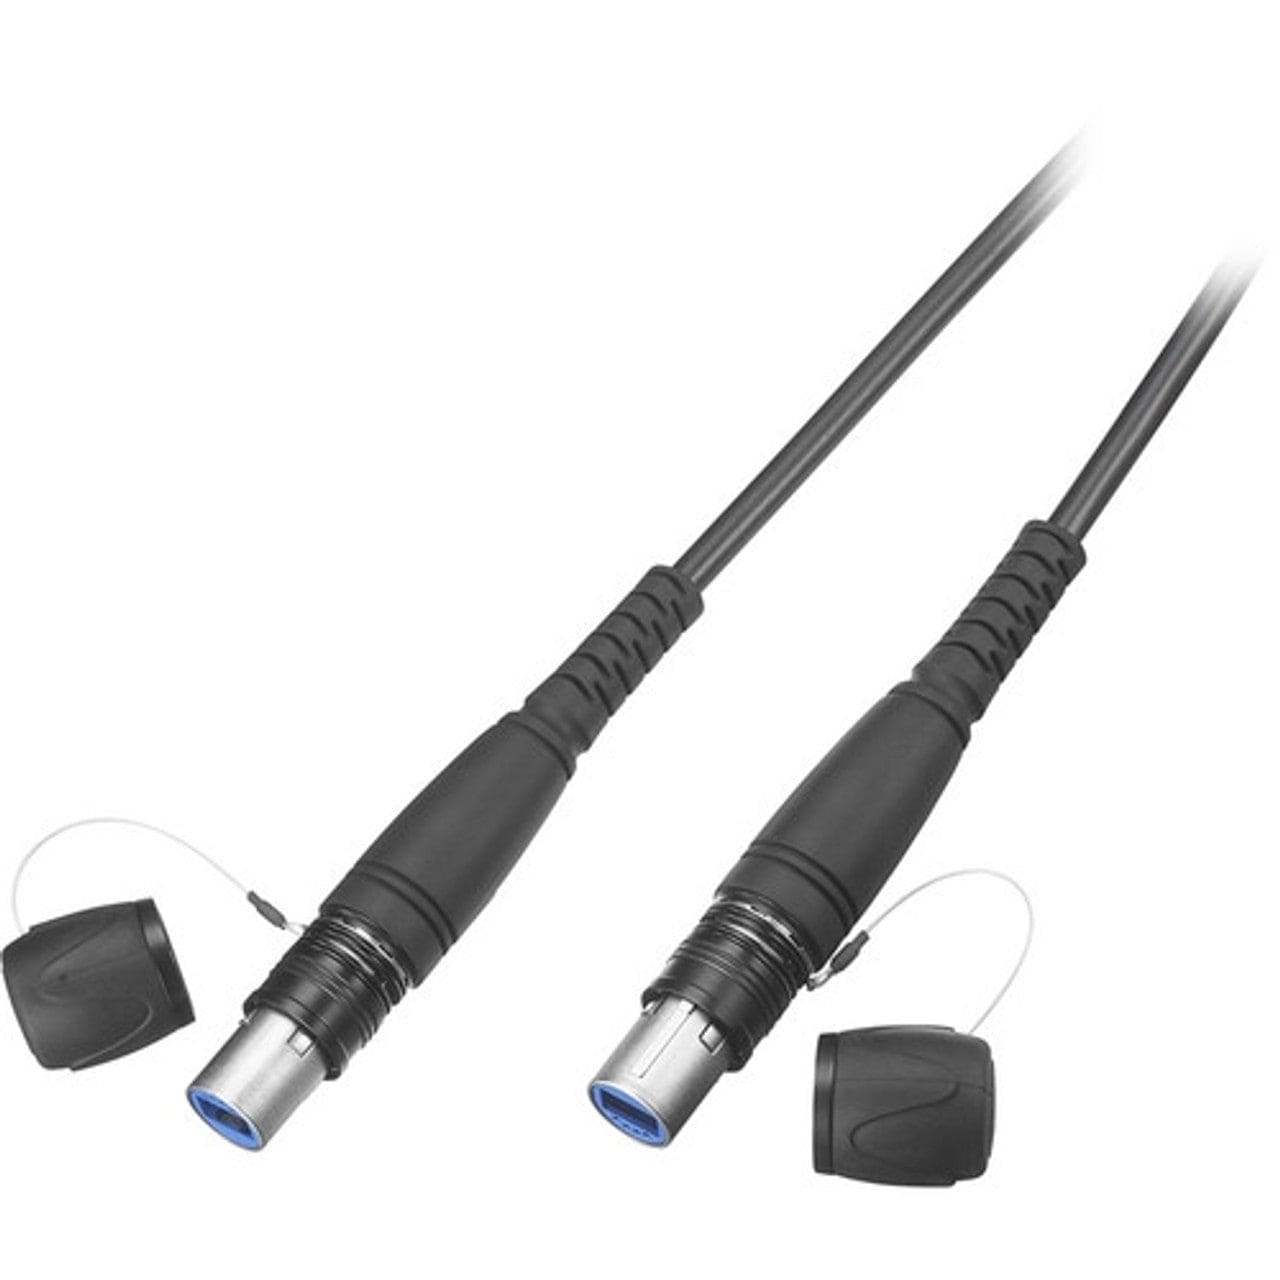 Sony CCFN-25 Optical Fiber Cable for Studio Camera - PSSL ProSound and Stage Lighting